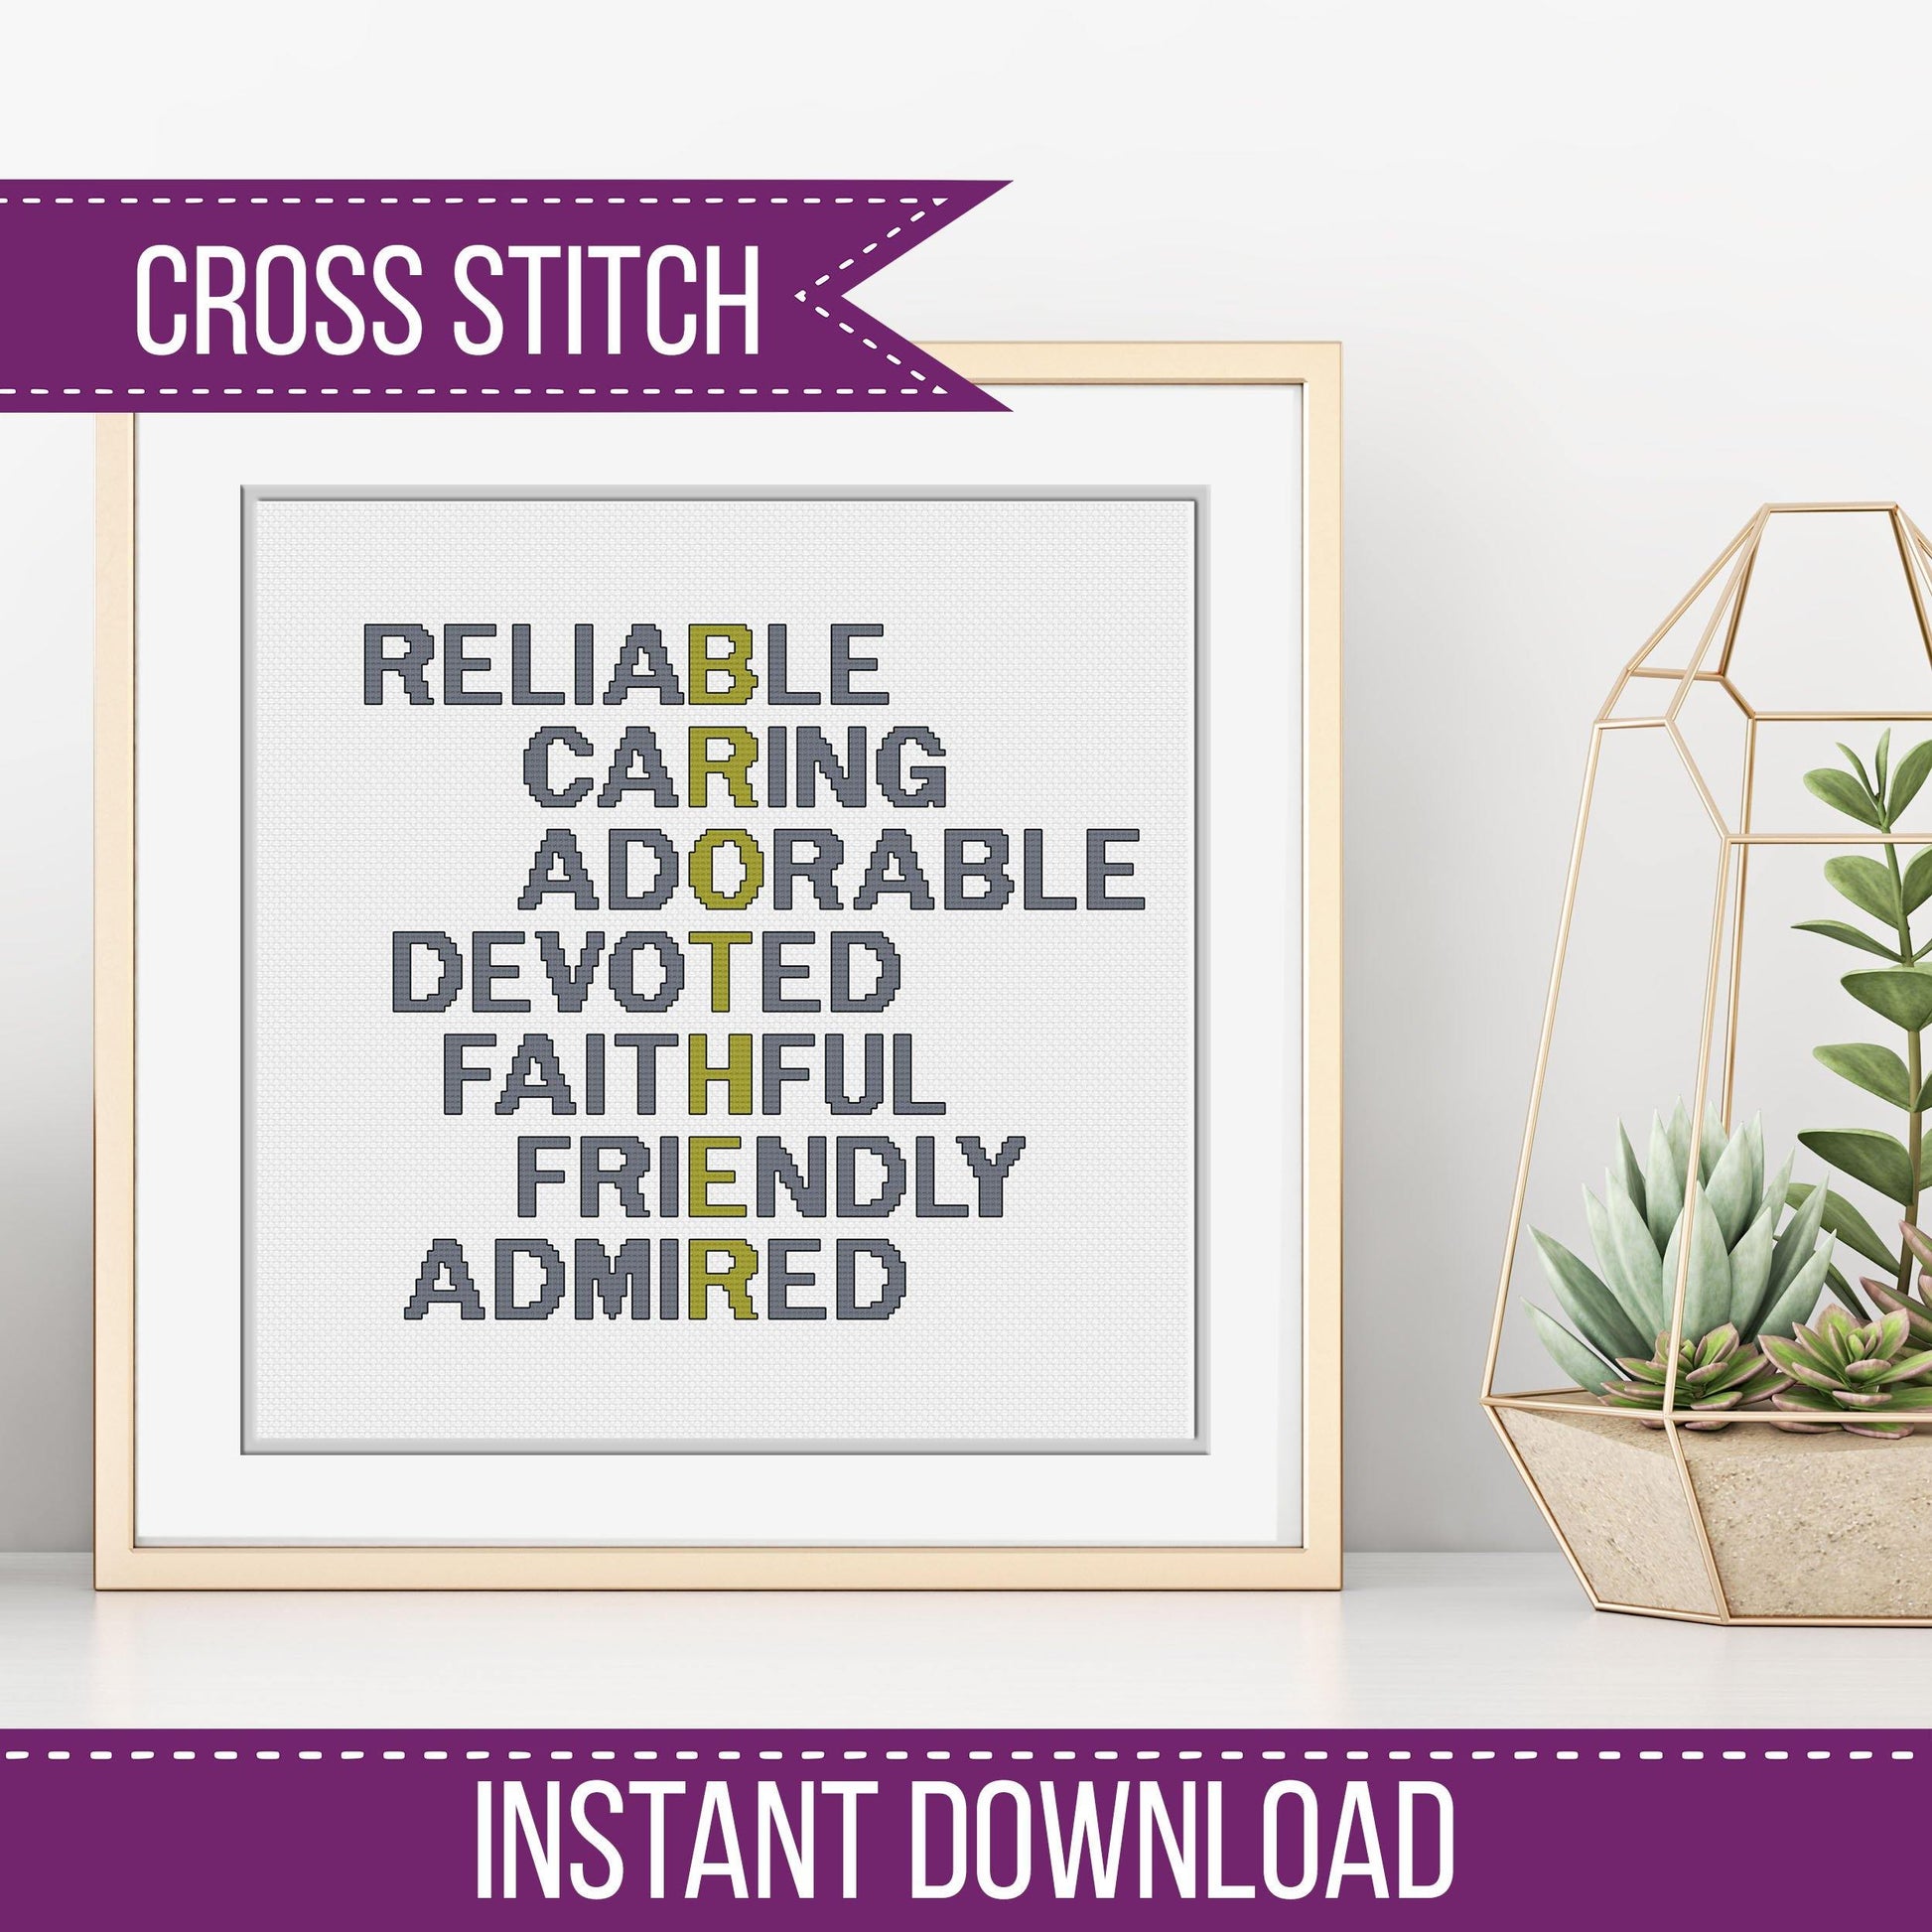 Brother Acrostic - Blackwork Patterns & Cross Stitch by Peppermint Purple